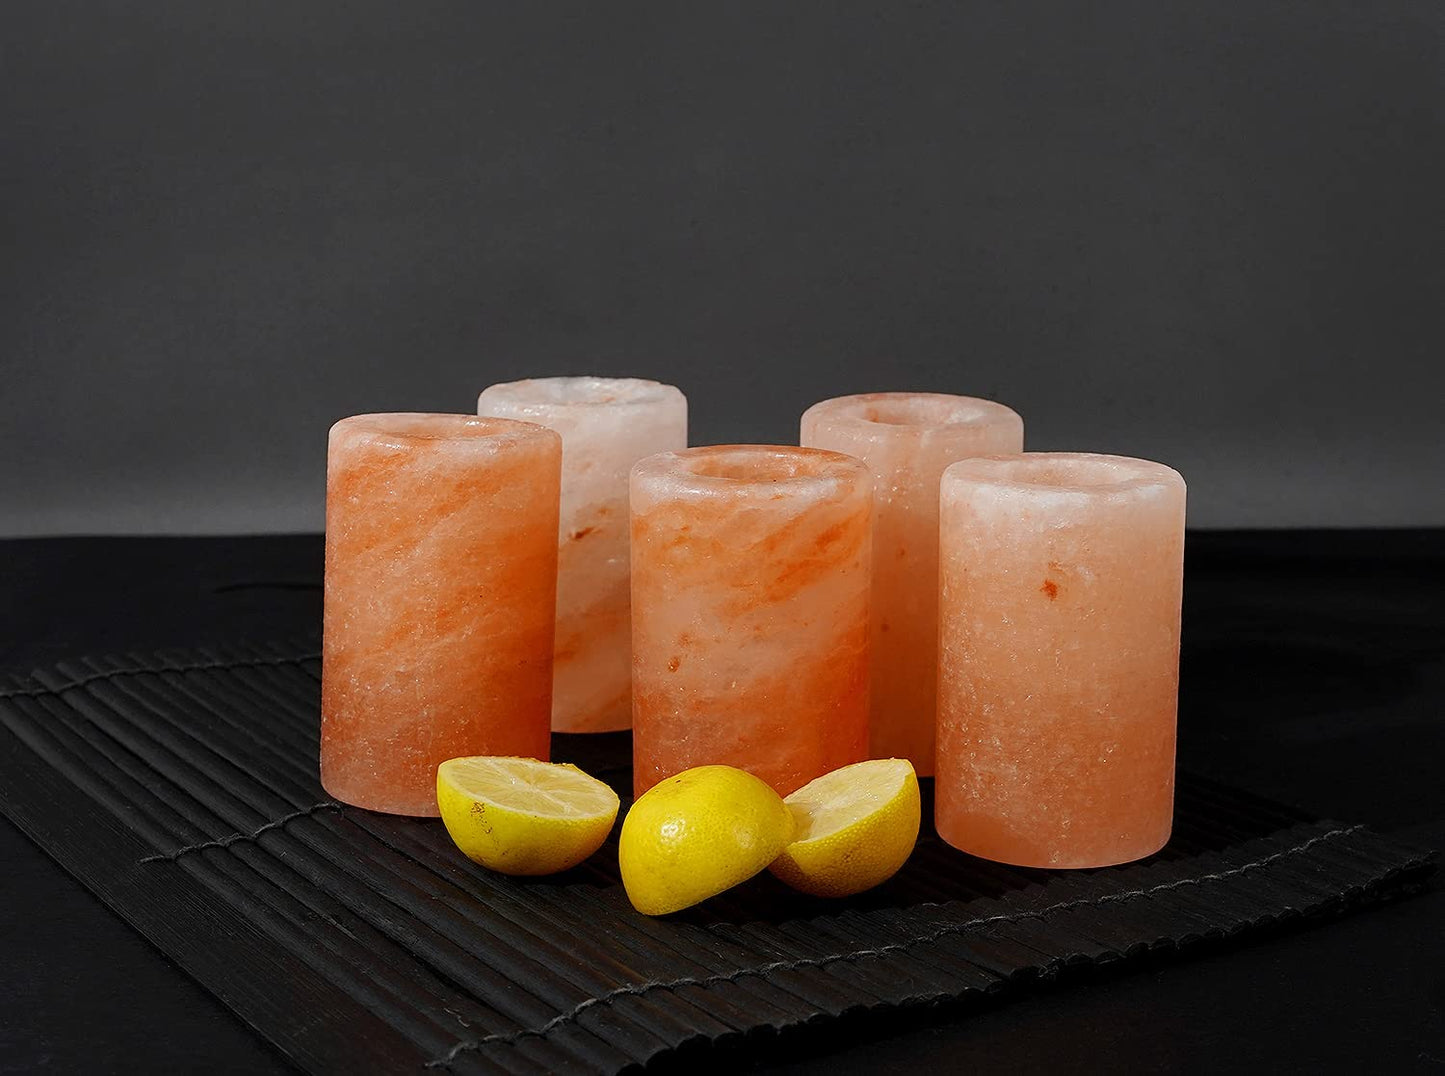 Pink Himalayan Salt Shot Glasses Hand Carved from 100% Natural Pink Salt Glasses Add Light Flavor to Food Cooking Accessory Tequila Shot Glasses Himalayan Salt Luxurious Holiday Gift Pack - Set of 6